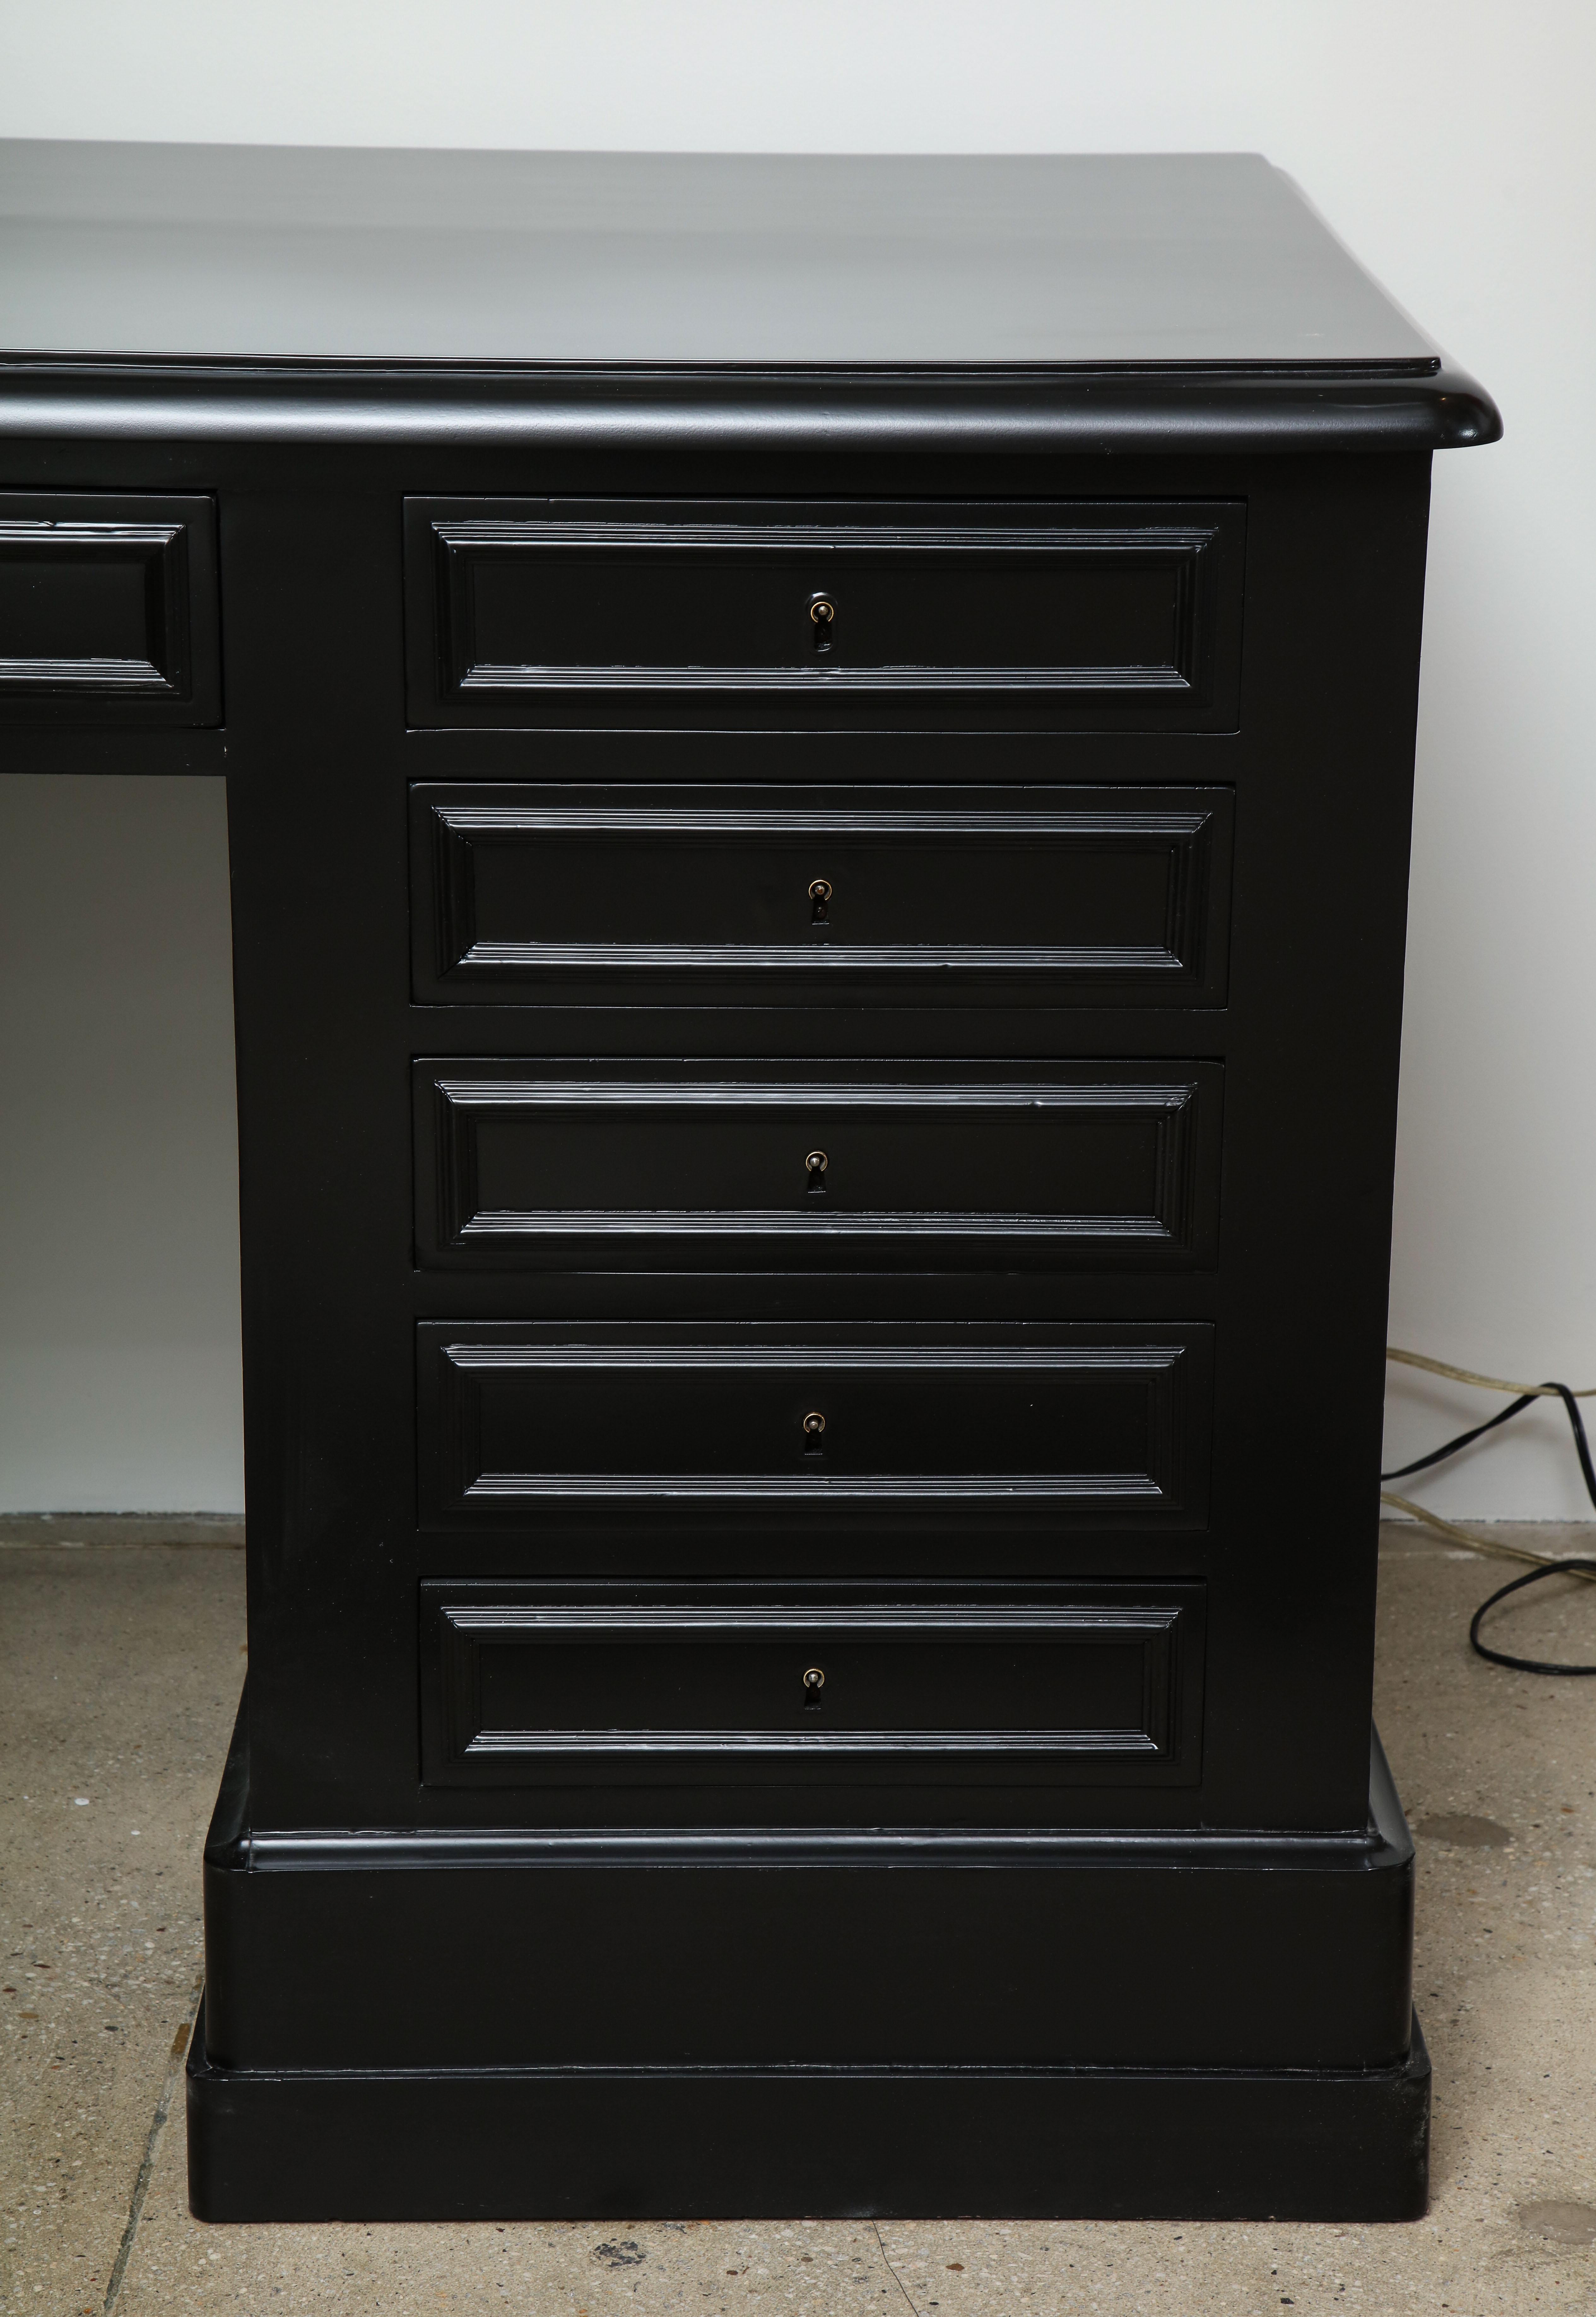 19th century ebonized Napoleon III desk, polished top, pedestal base containing five drawers on either side.